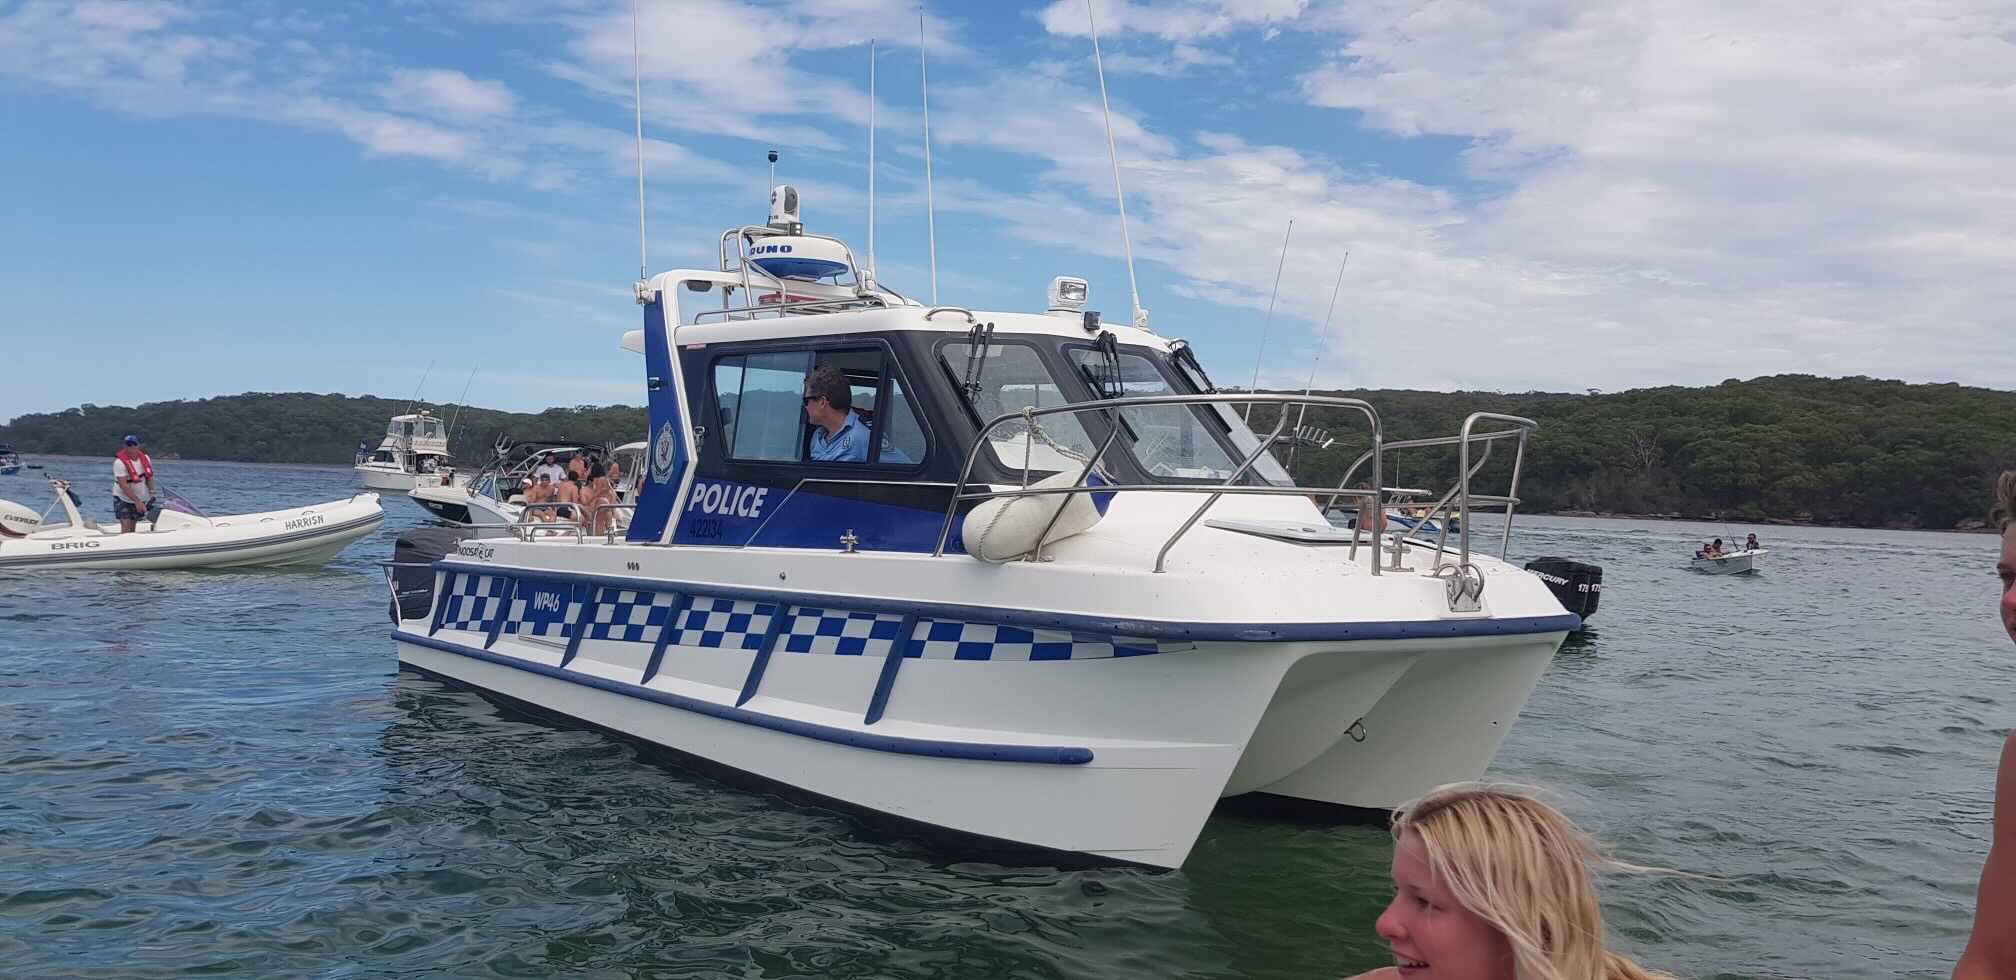 Water police patrolling the area at Lilli Pilli.